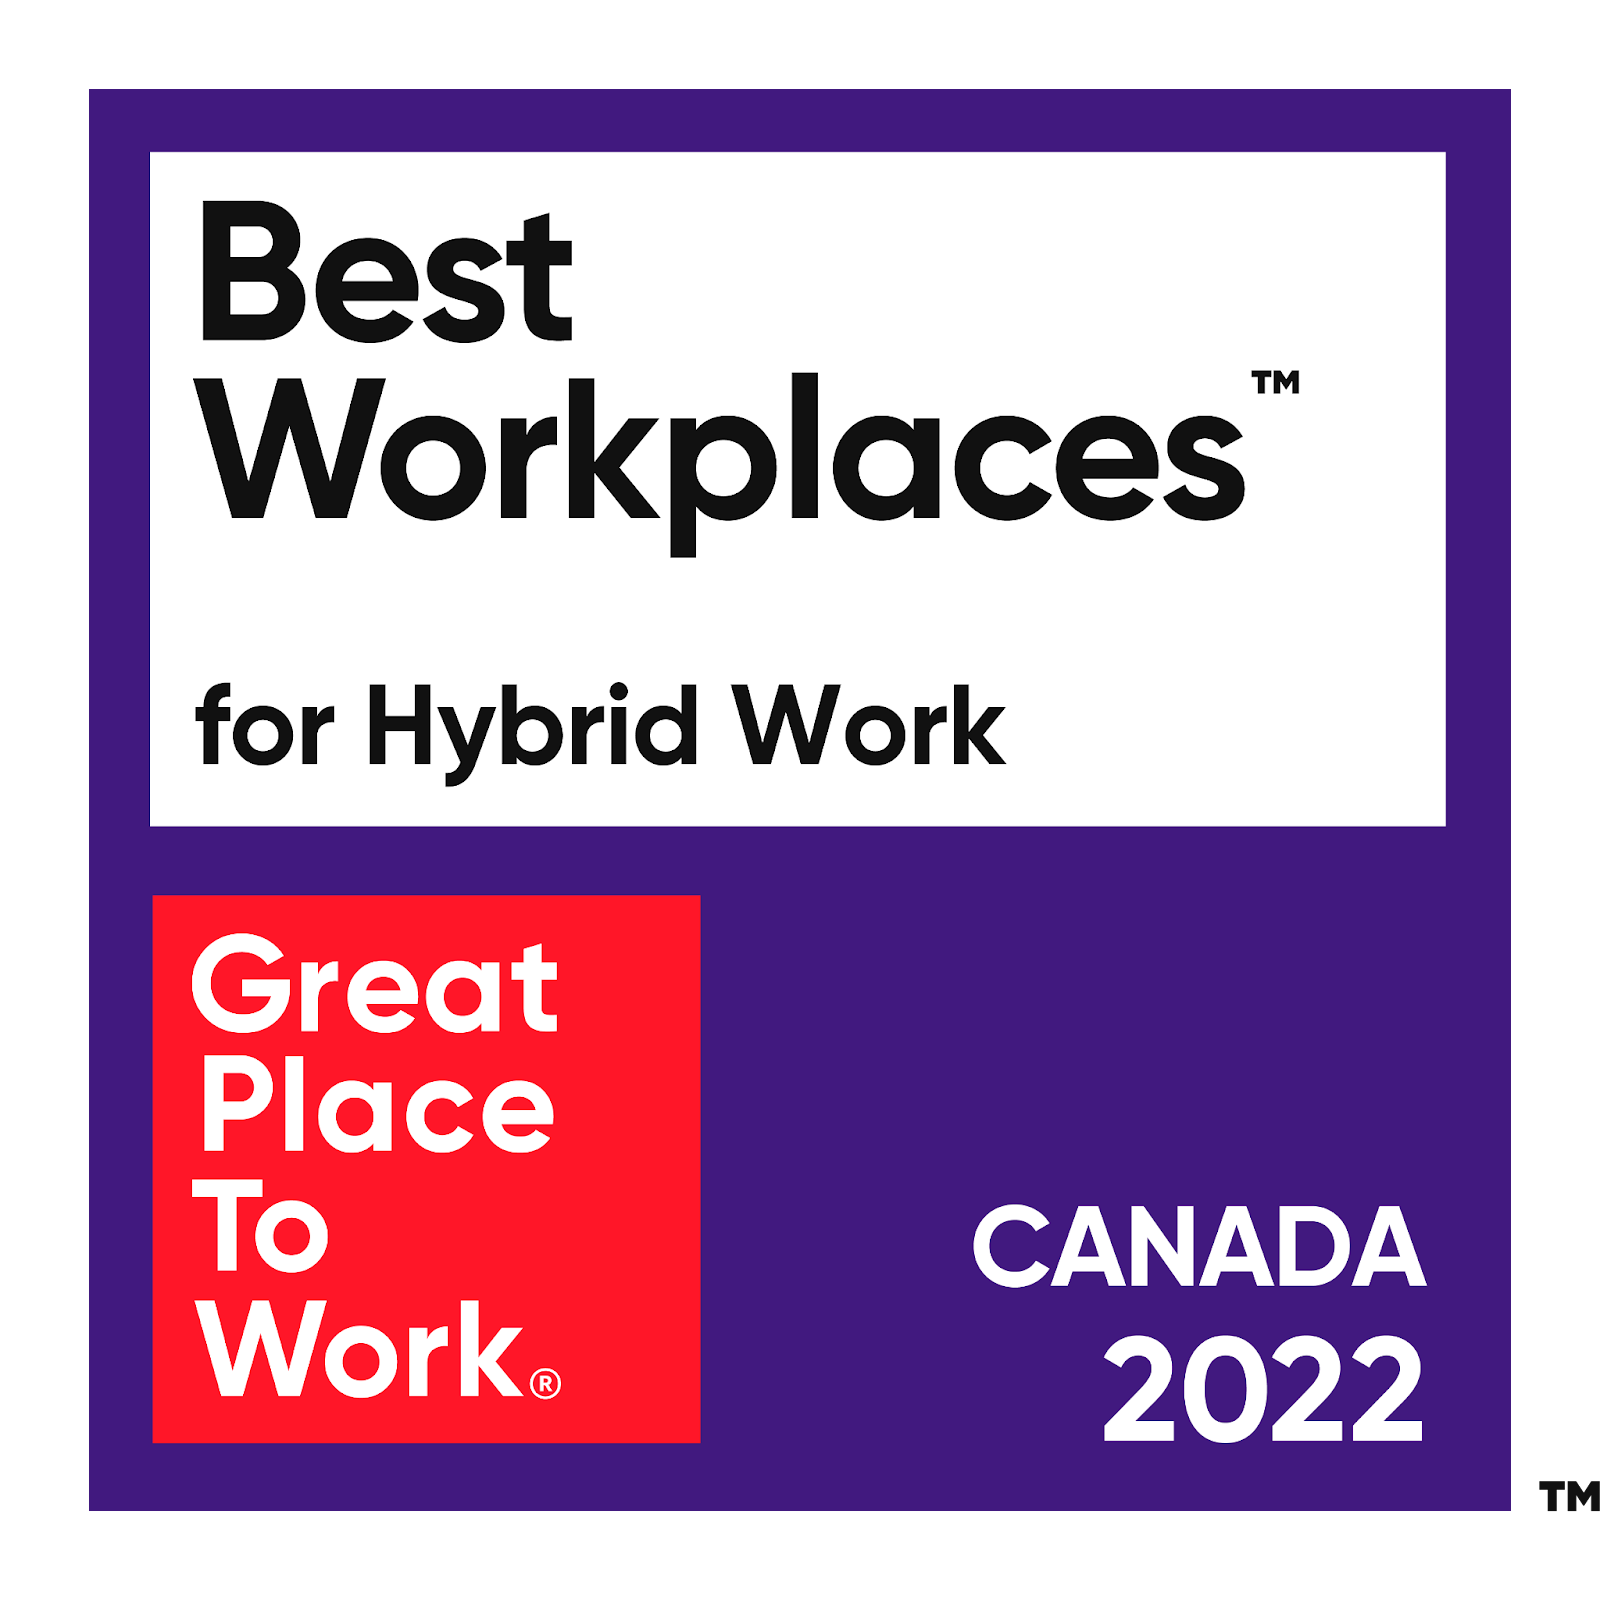 Great place to work best workplaces for hybrid 2021